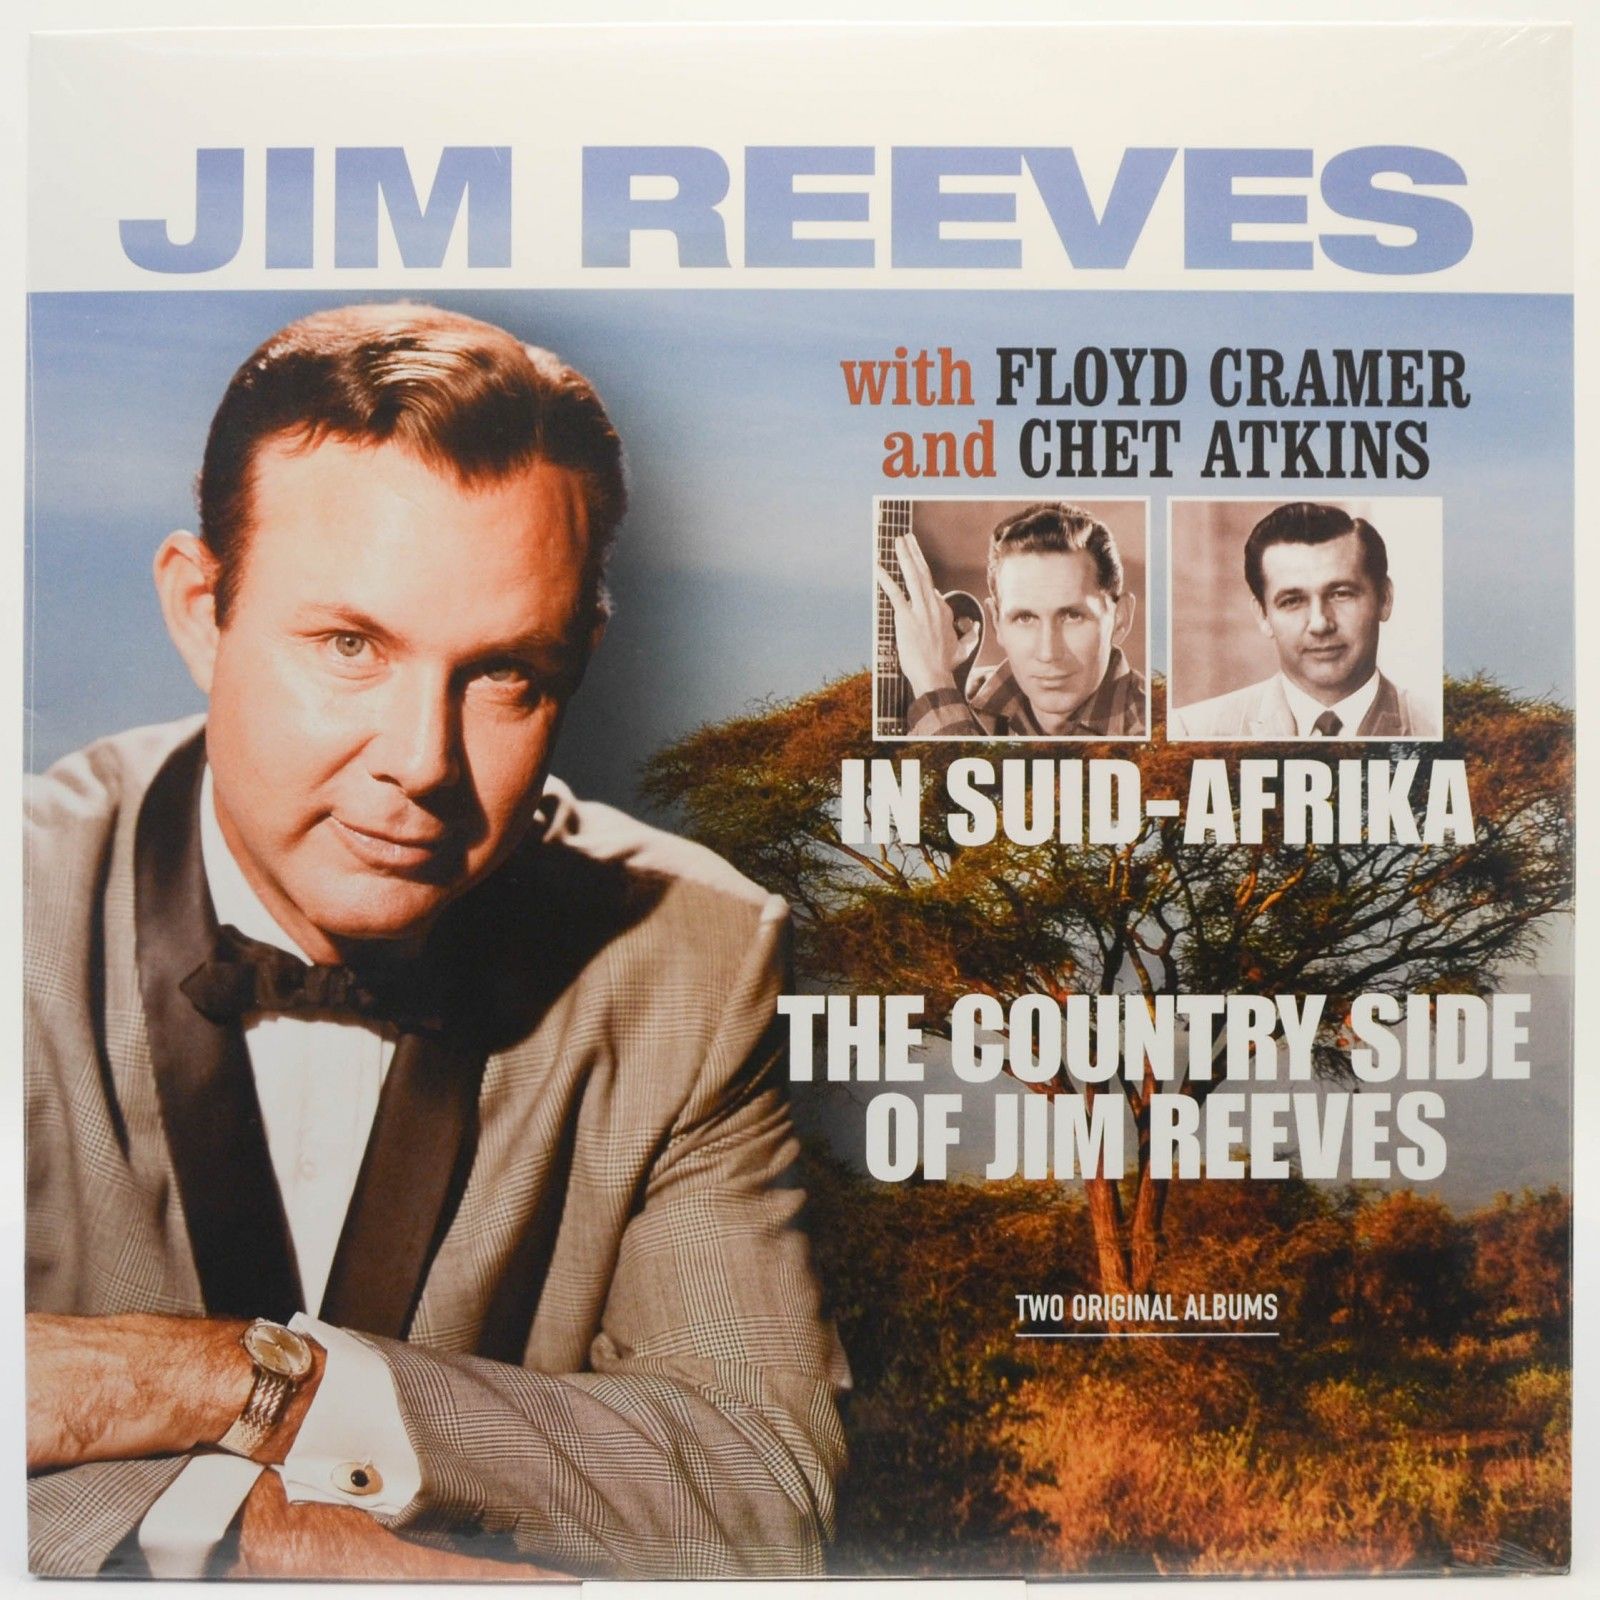 Jim Reeves With Floyd Cramer And Chet Atkins — In Suid-Afrika / The Country Side Of Jim Reeves, 2017